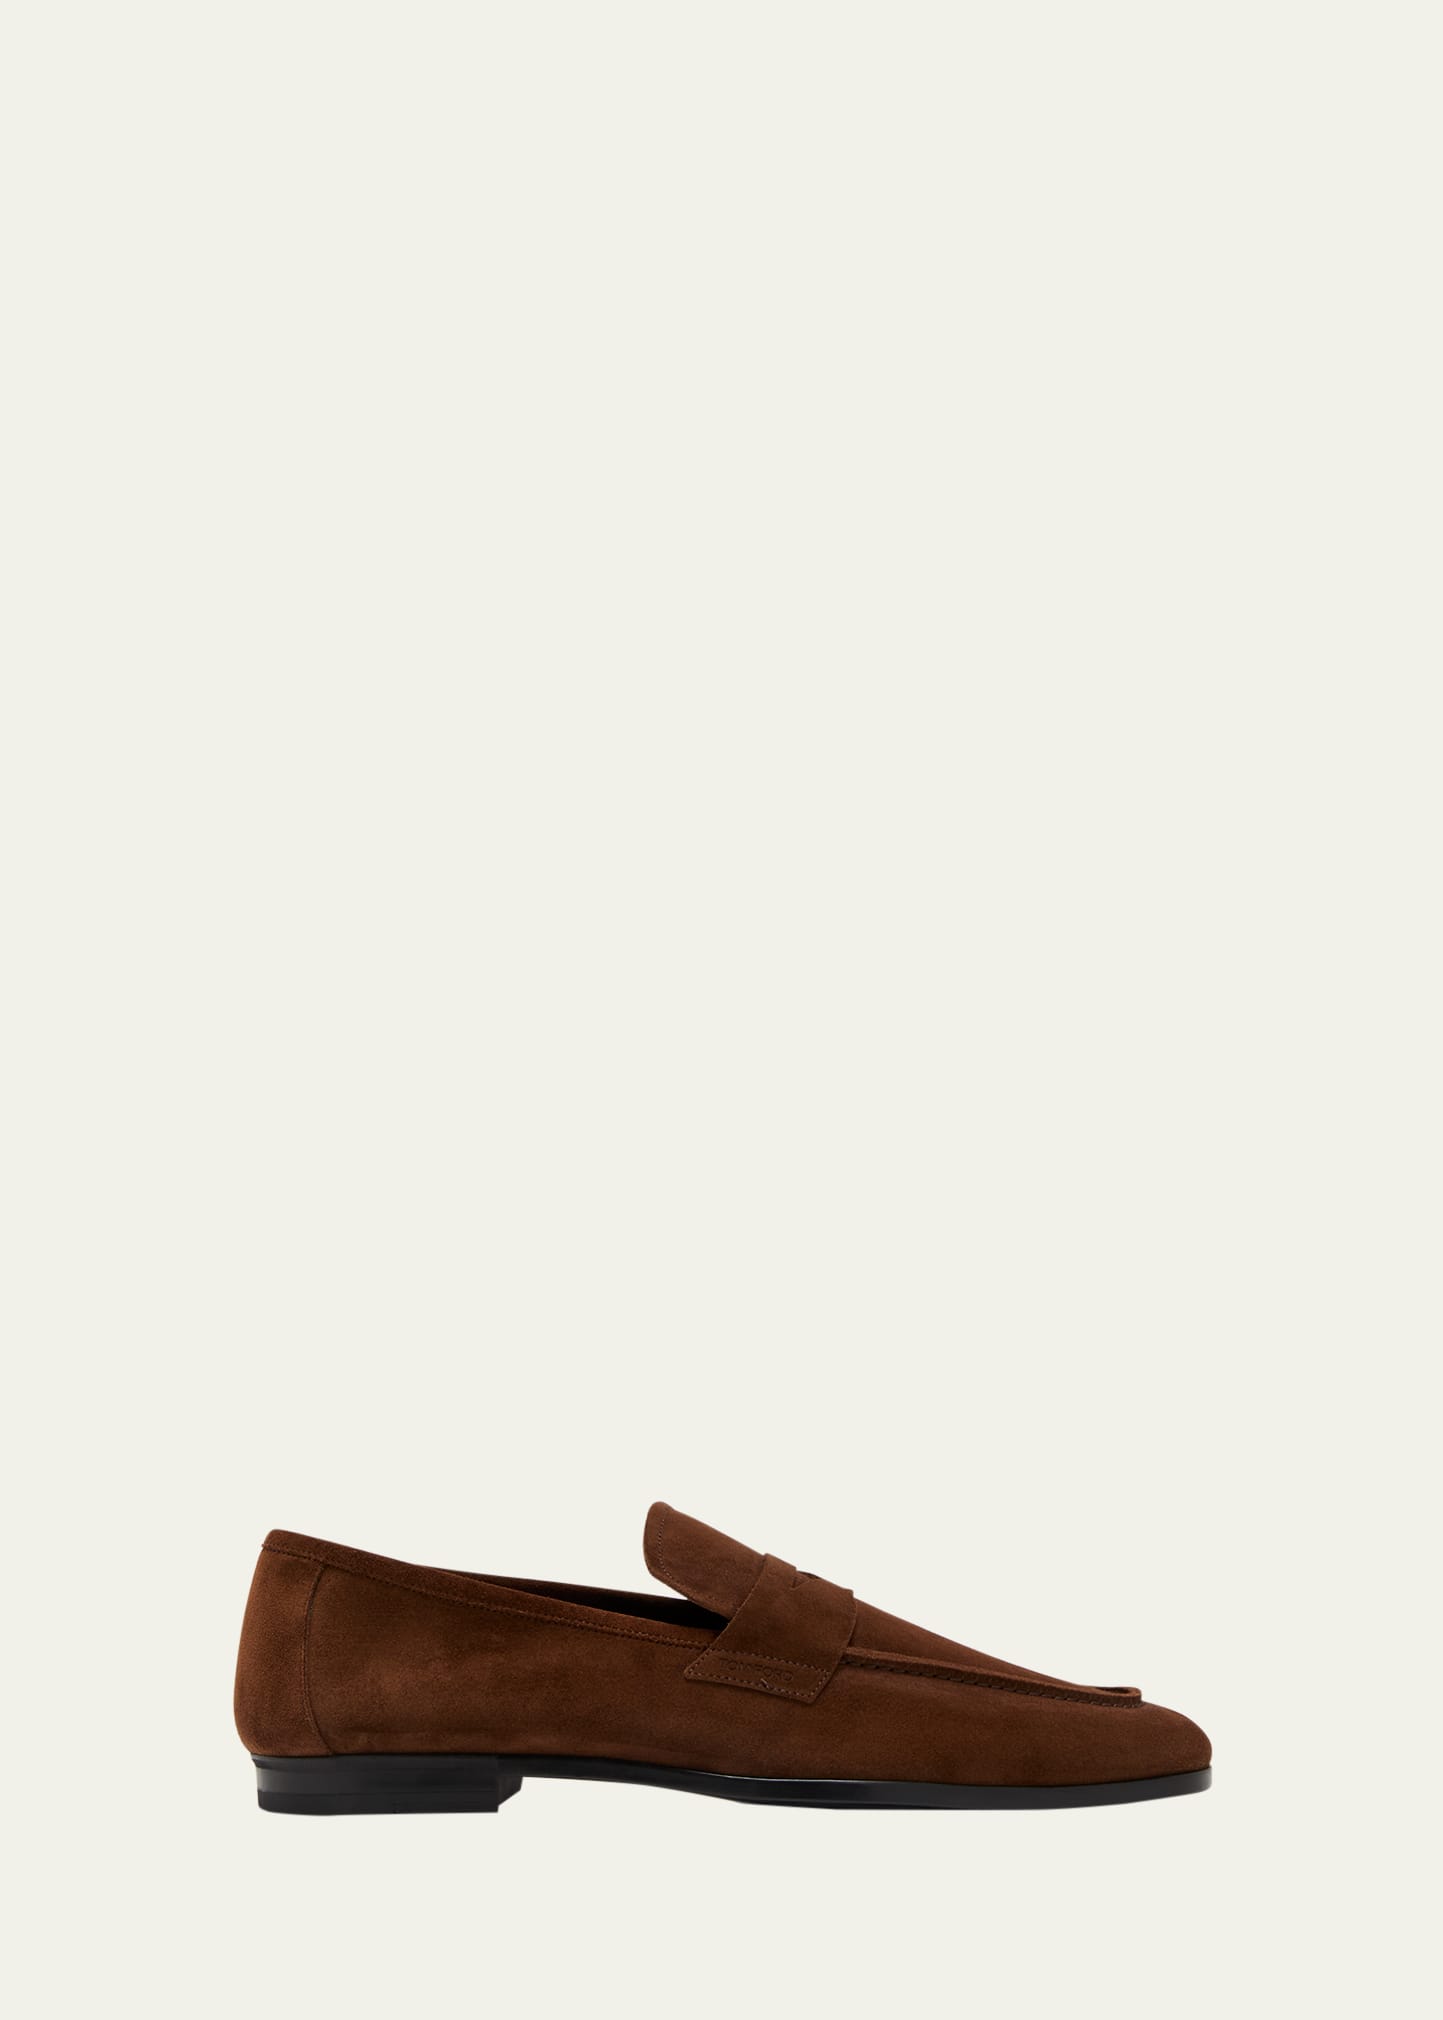 TOM FORD MEN'S SEAN SUEDE PENNY LOAFERS